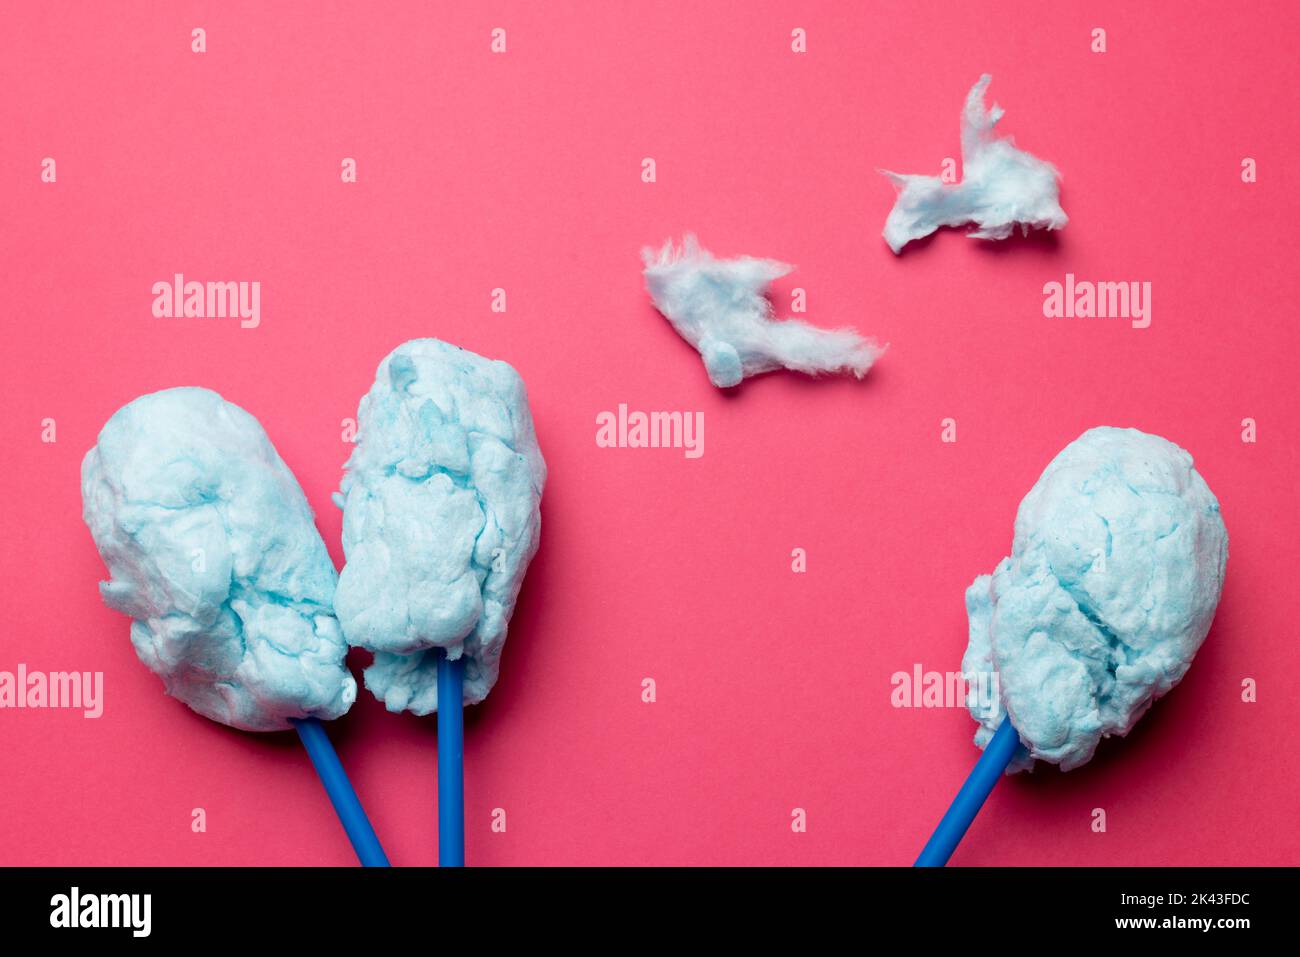 Horizontal image of homemade blue candy floss on three sticks, on pink background with copy space Stock Photo